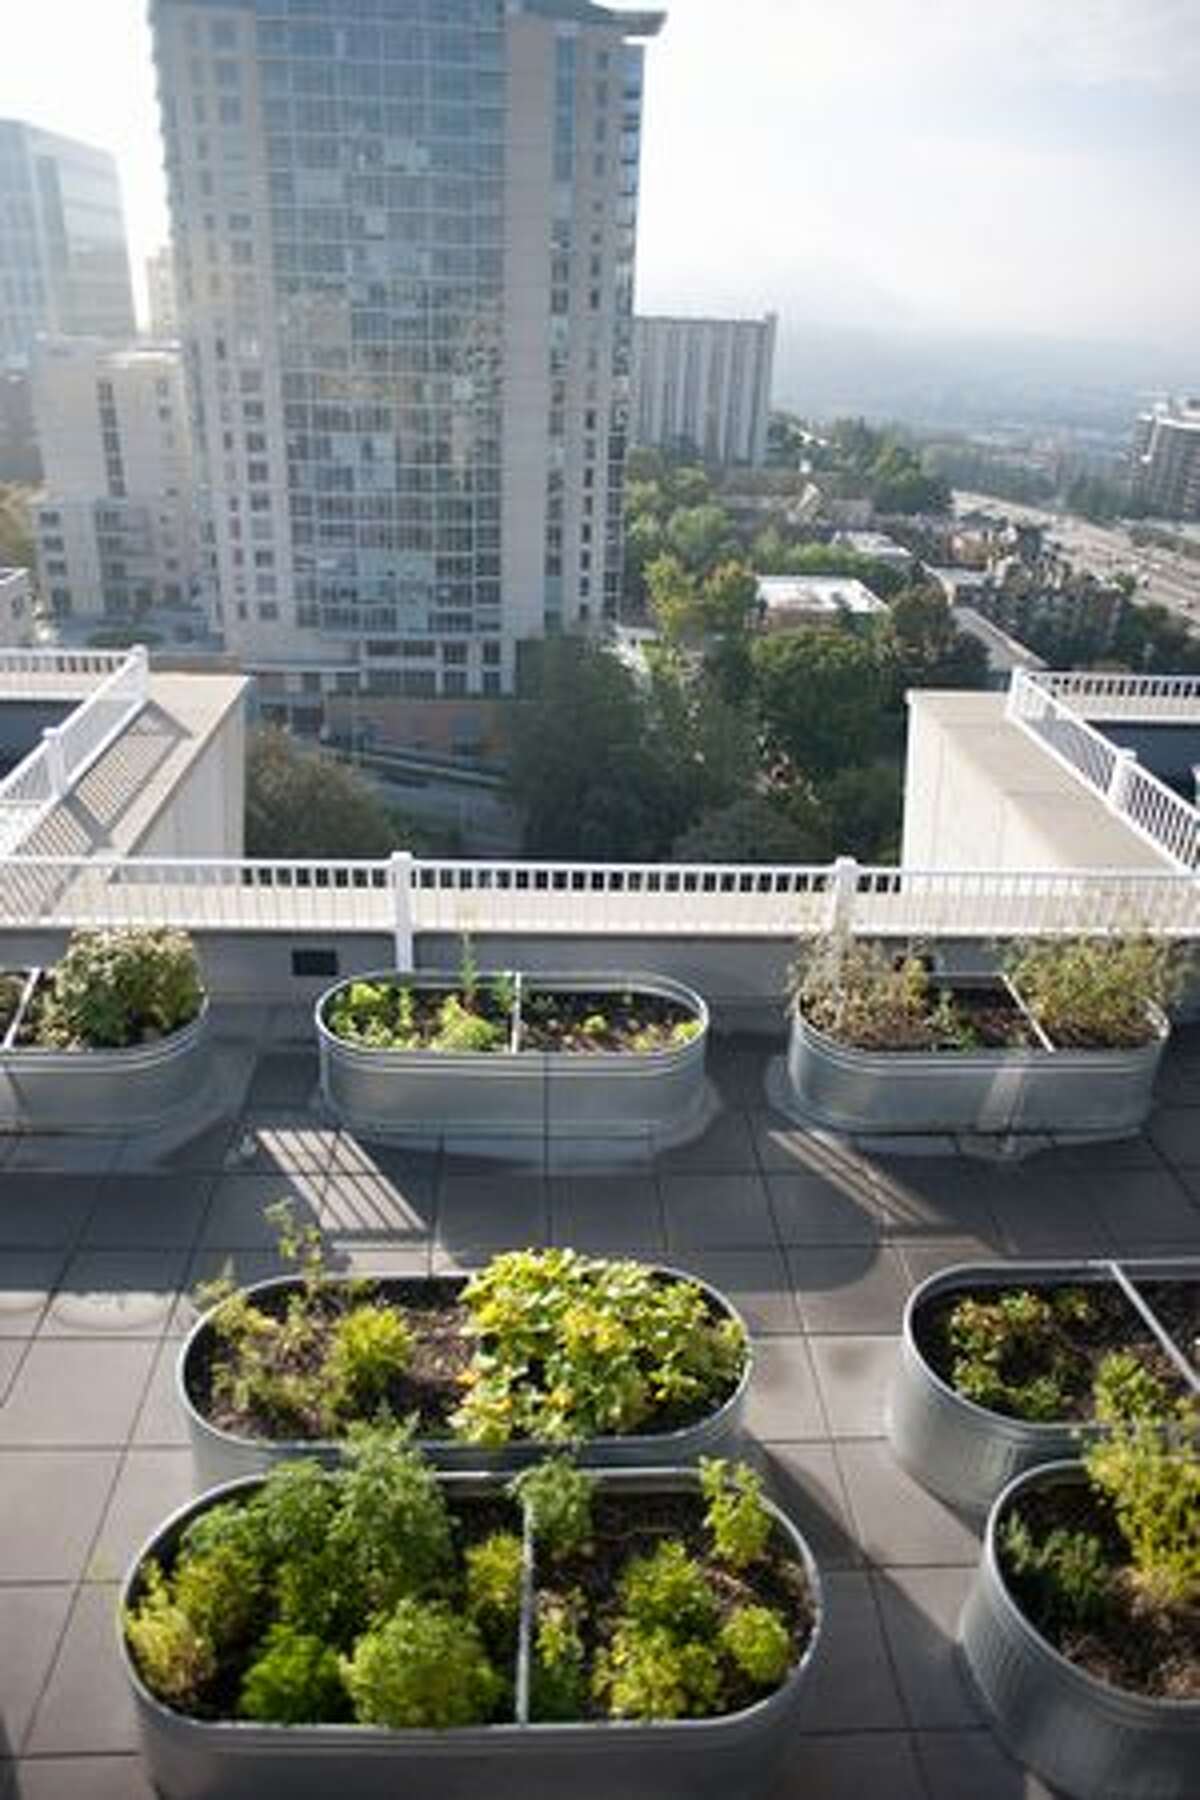 Greenery and scenery are located on the green roof of the M Street Apartments.